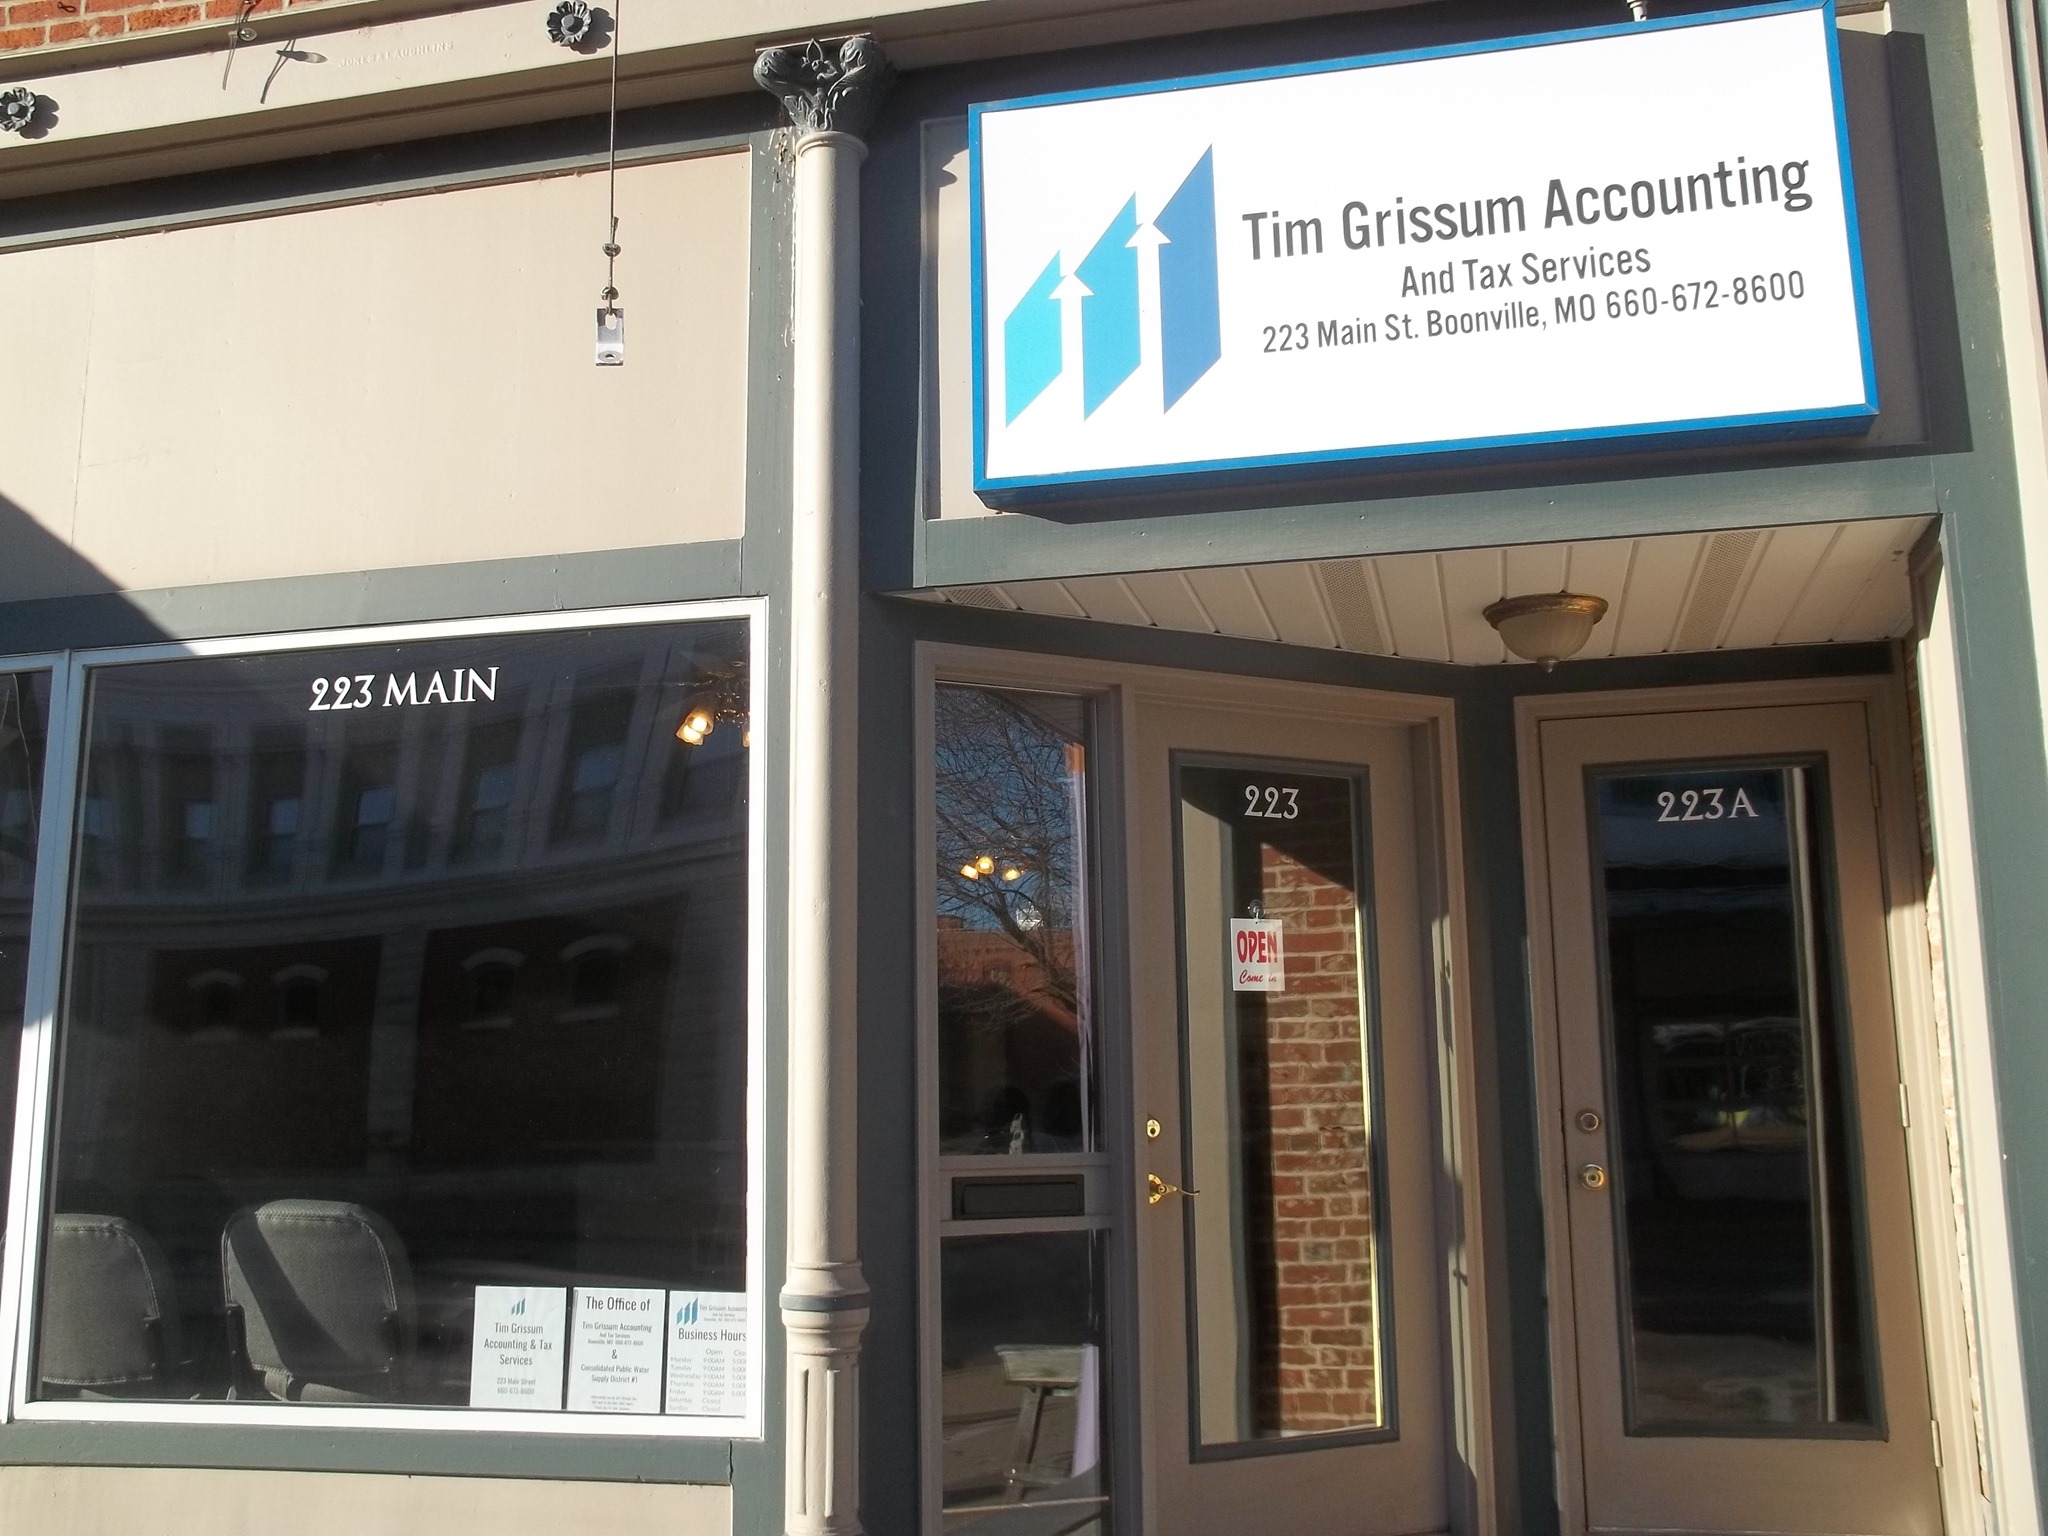 Tim Grissum Accounting and Tax 223 Main St, Boonville Missouri 65233